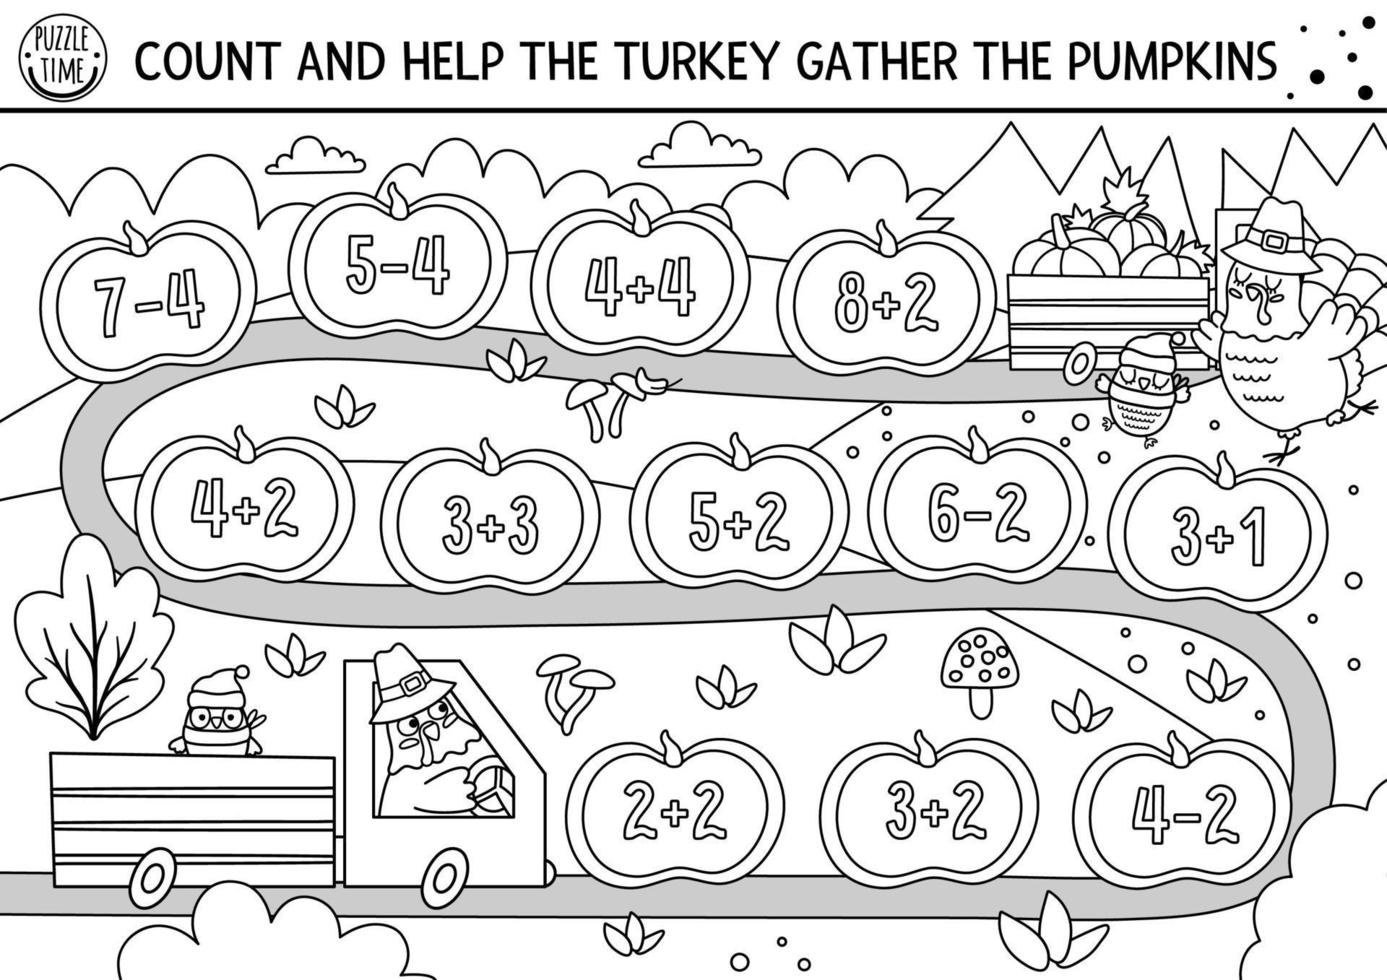 Thanksgiving Day black and white counting dice board game for children with cute turkey driving a car with pumpkins. Autumn line holiday boardgame with numbers. Fall math activity for kids. vector